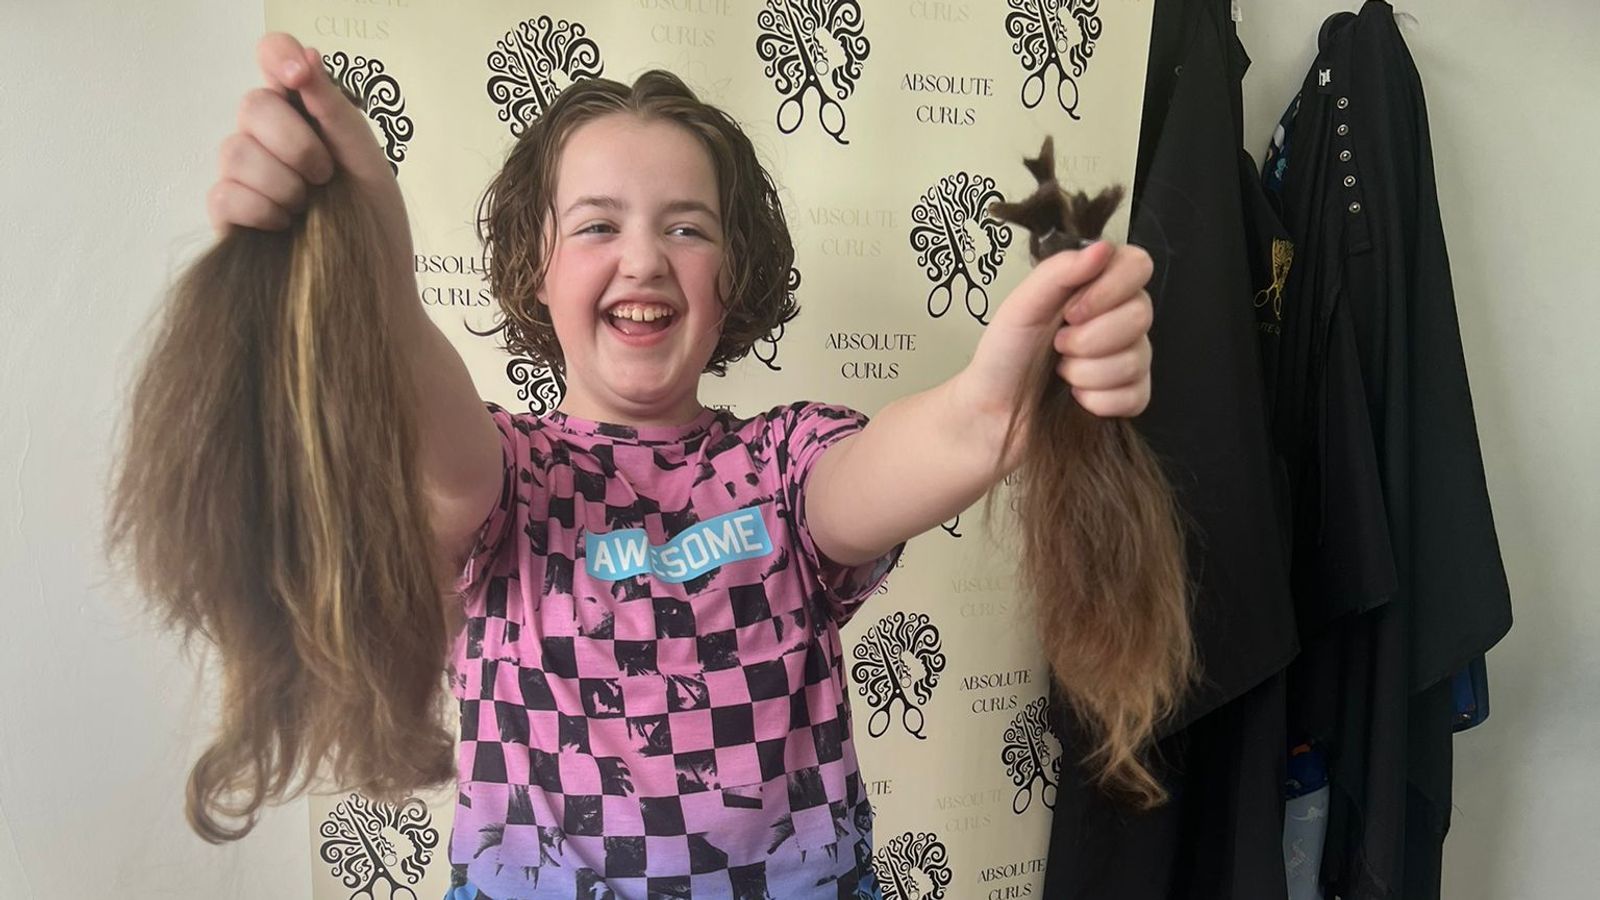 'Proud' 10-year-old girl cuts off hair for second time for charity